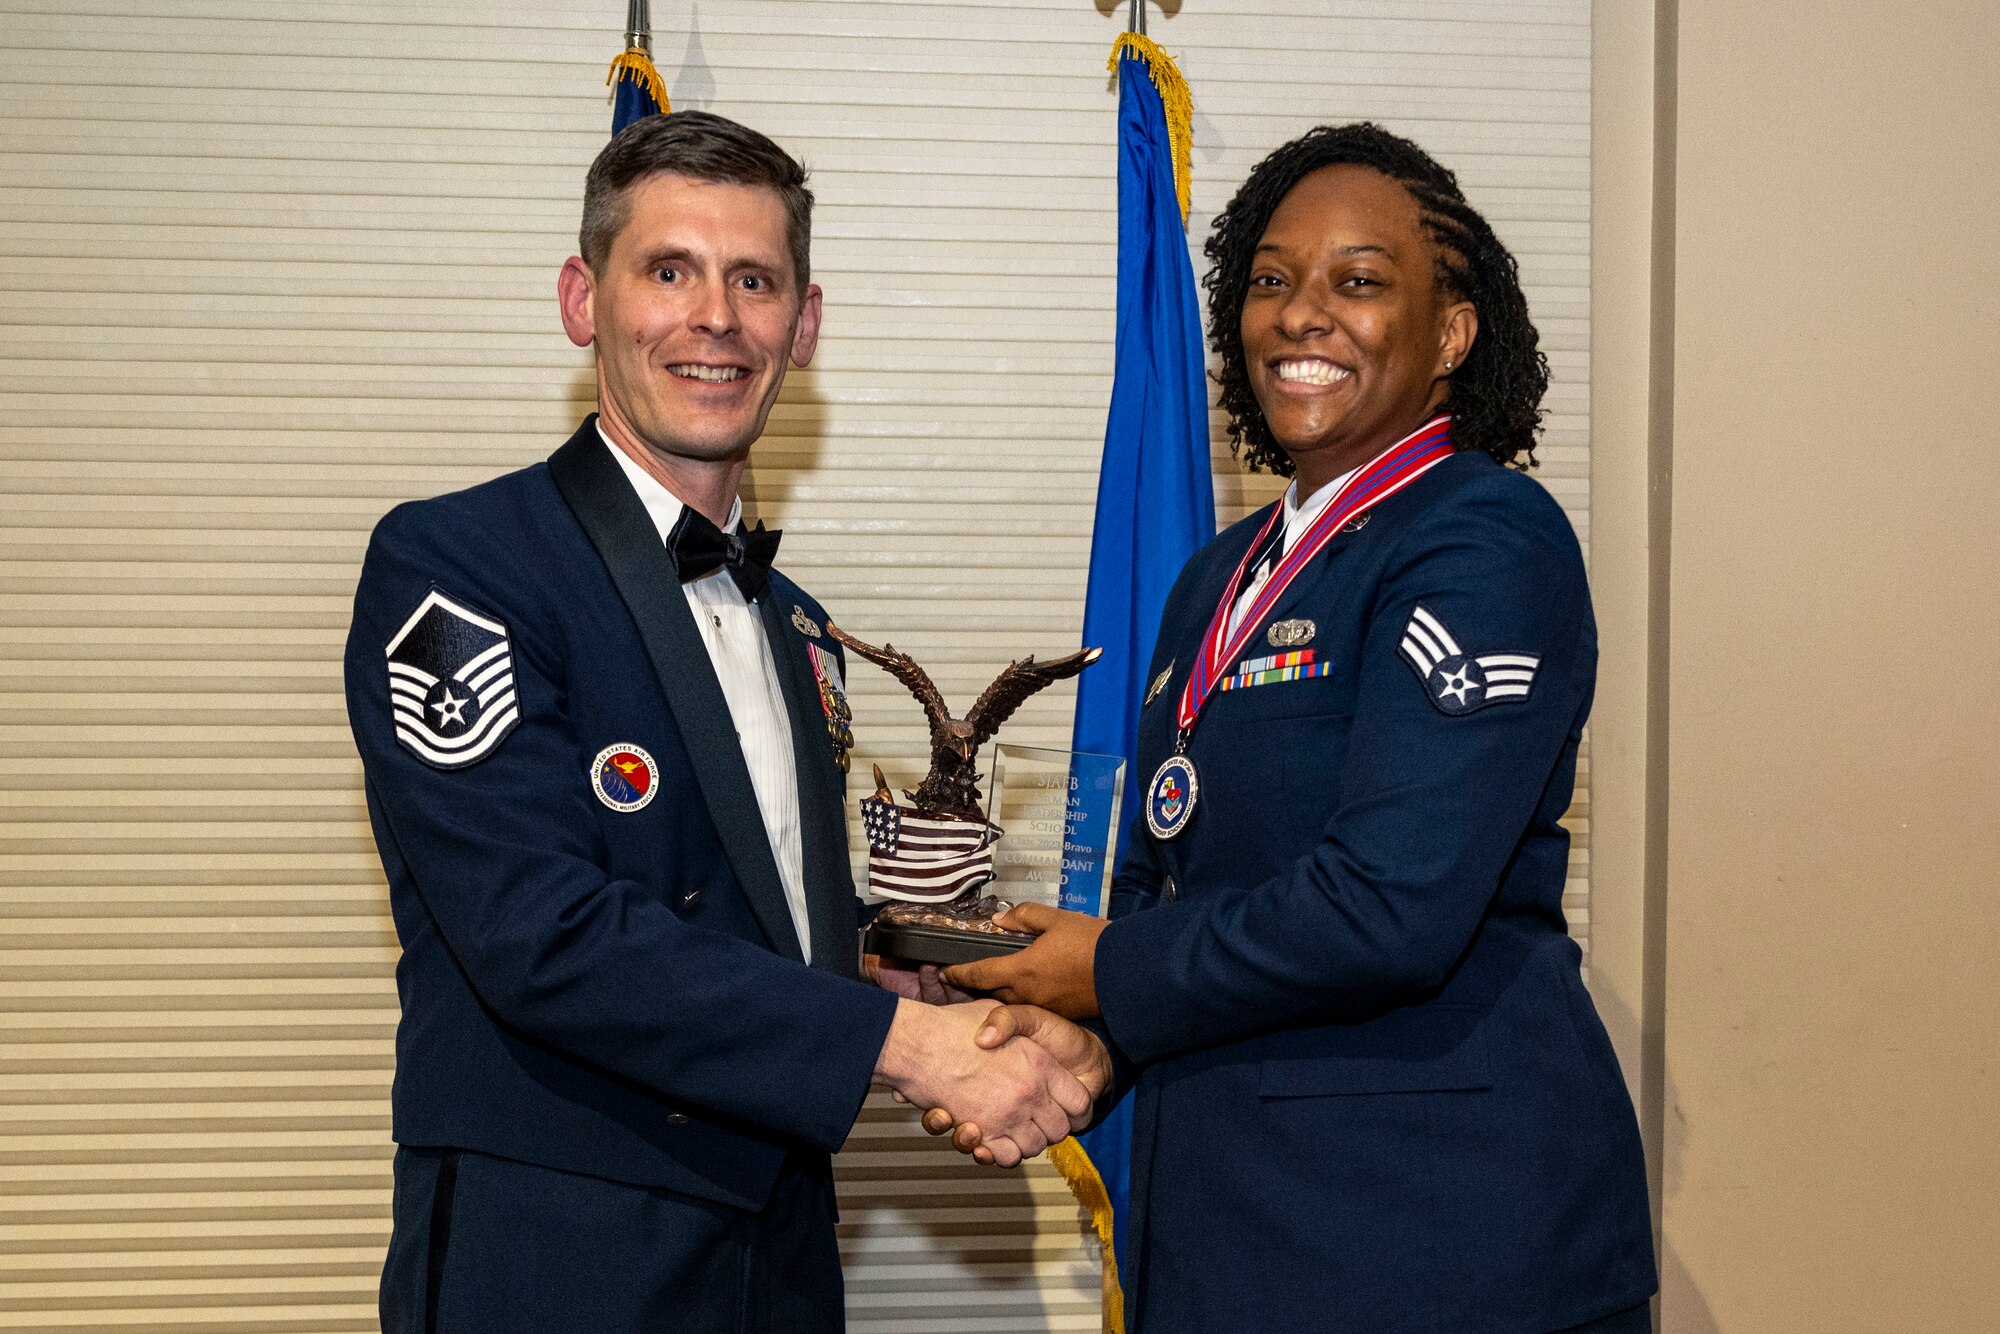 Senior Airman Shartavia Oaks, 4th Security Forces Squadron investigator, right, receives the commandant’s award from Master Sergeant Brandin Wendt, Airman Leadership School commandant, during ALS class 23-B graduation ceremony at Seymour Johnson Air Force Base, North Carolina, Feb. 9, 2023. The commandant’s award was given to the Airman in an ALS class that possesses the highest degree of character, competence and commitment.